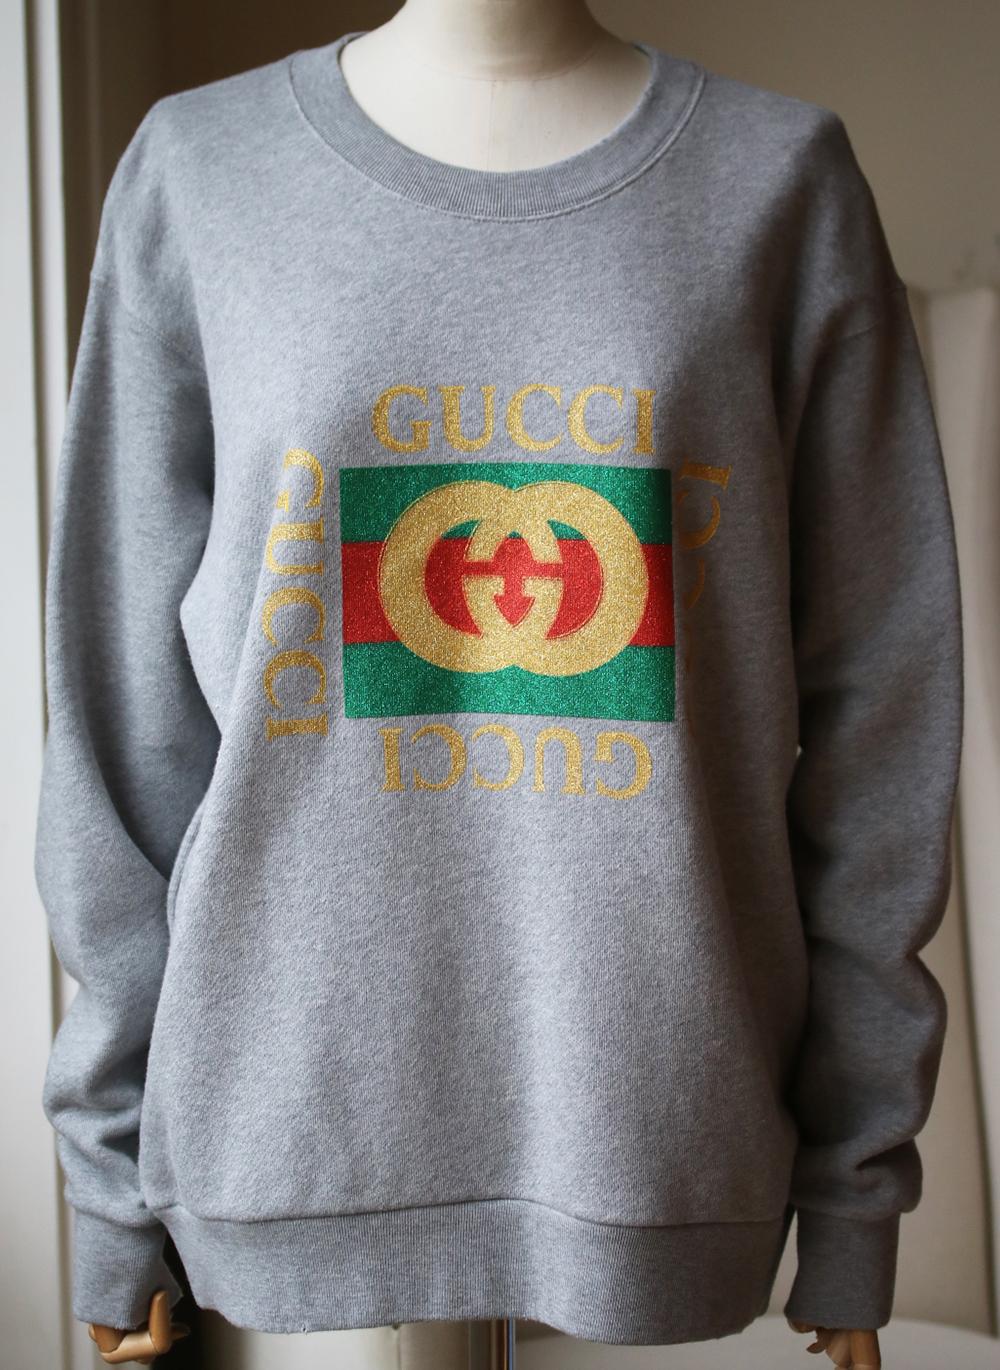 Printed with a glittered version of Gucci's '80s-era emblem, this oversized sweatshirt is cut from soft cotton-terry and turns to reveal an appliquéd tiger at the back. Multicolored cotton-terry. Slips on. 100% cotton. Made in Italy.

Size: Small